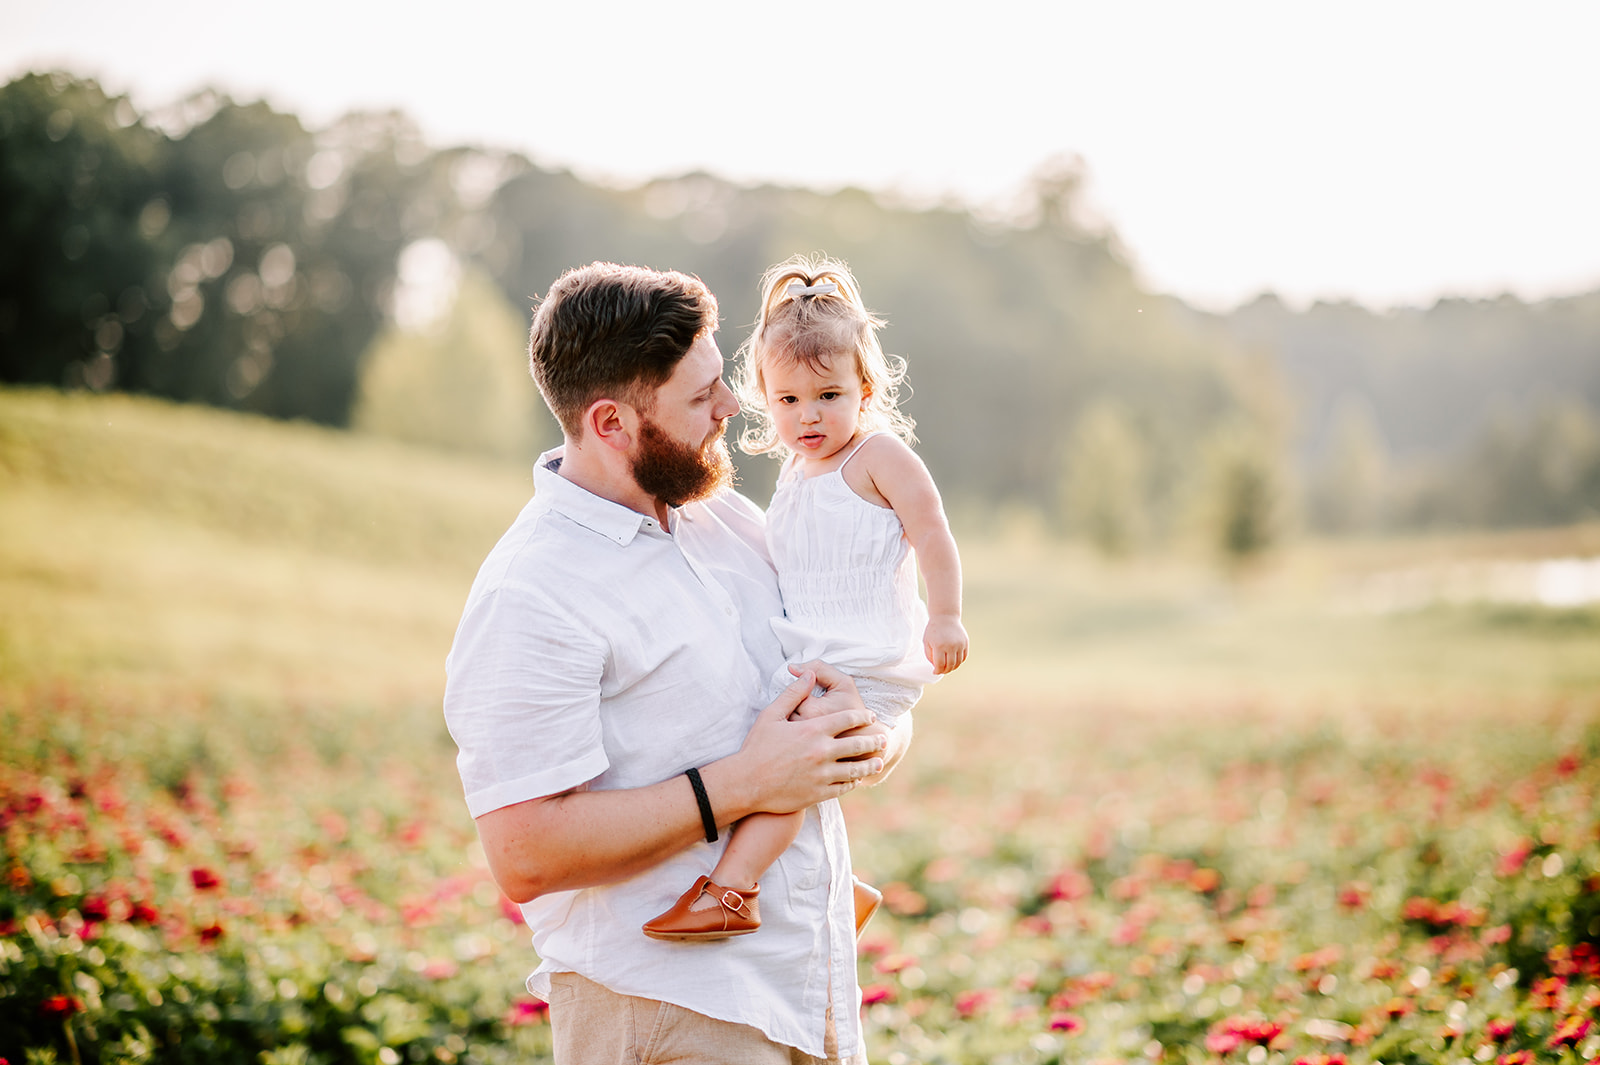 A father in a white shirt stands in a field of flowers holding his curious toddler daughter in a white dress on his hip before doing some North Carolina Apple Picking